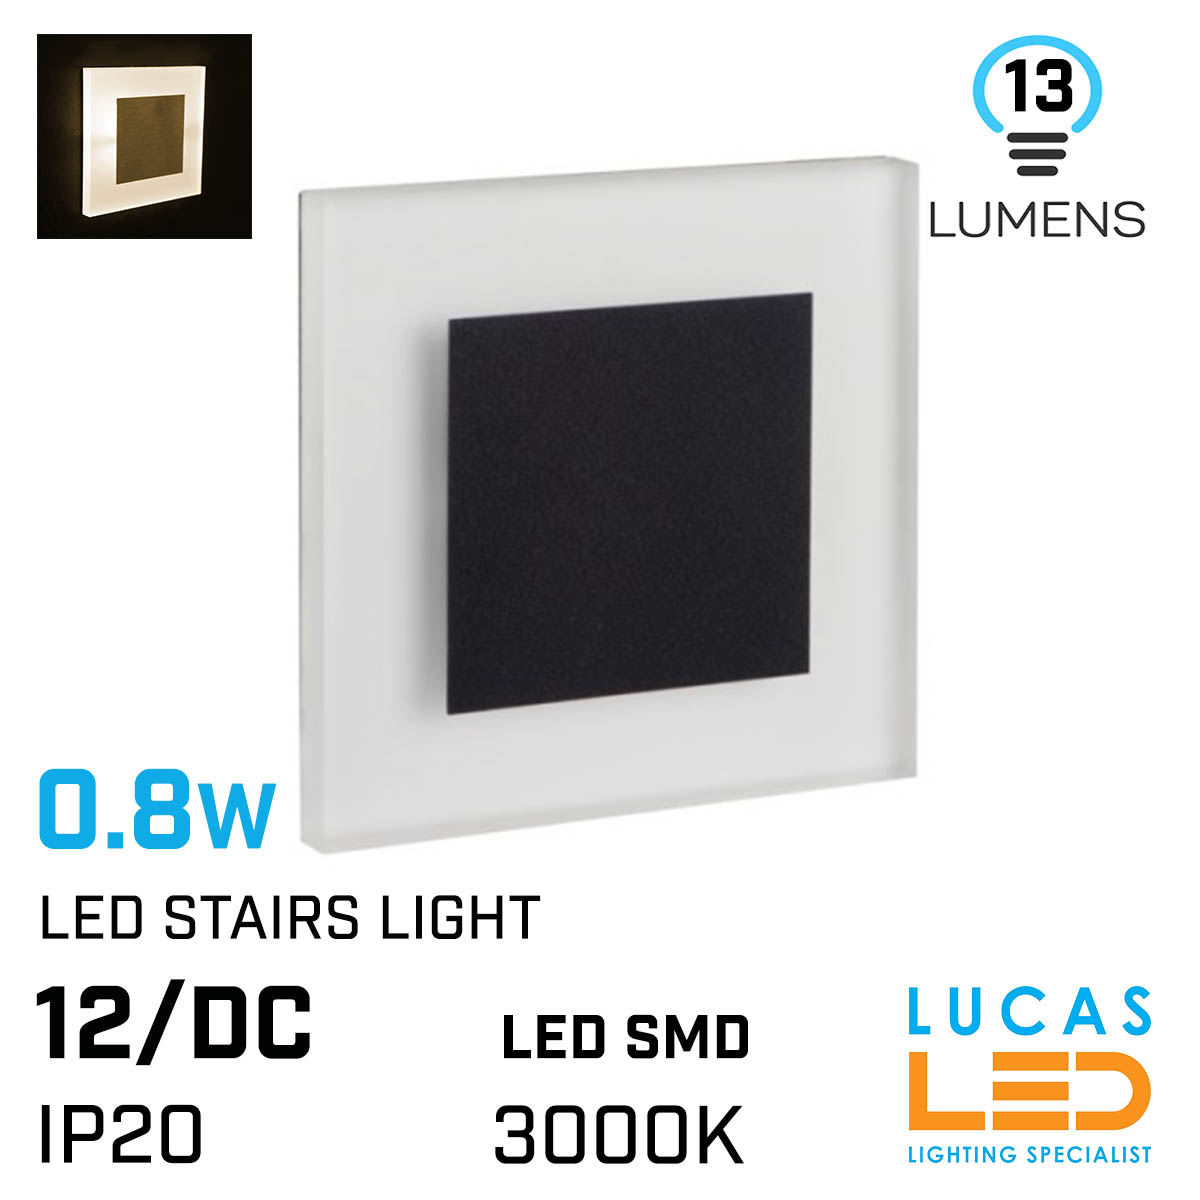 LED Wall / Stairs Lighting 0.8W - 3000K Warm White - 12V / DC - 13lm - IP20 - recessed - APUS